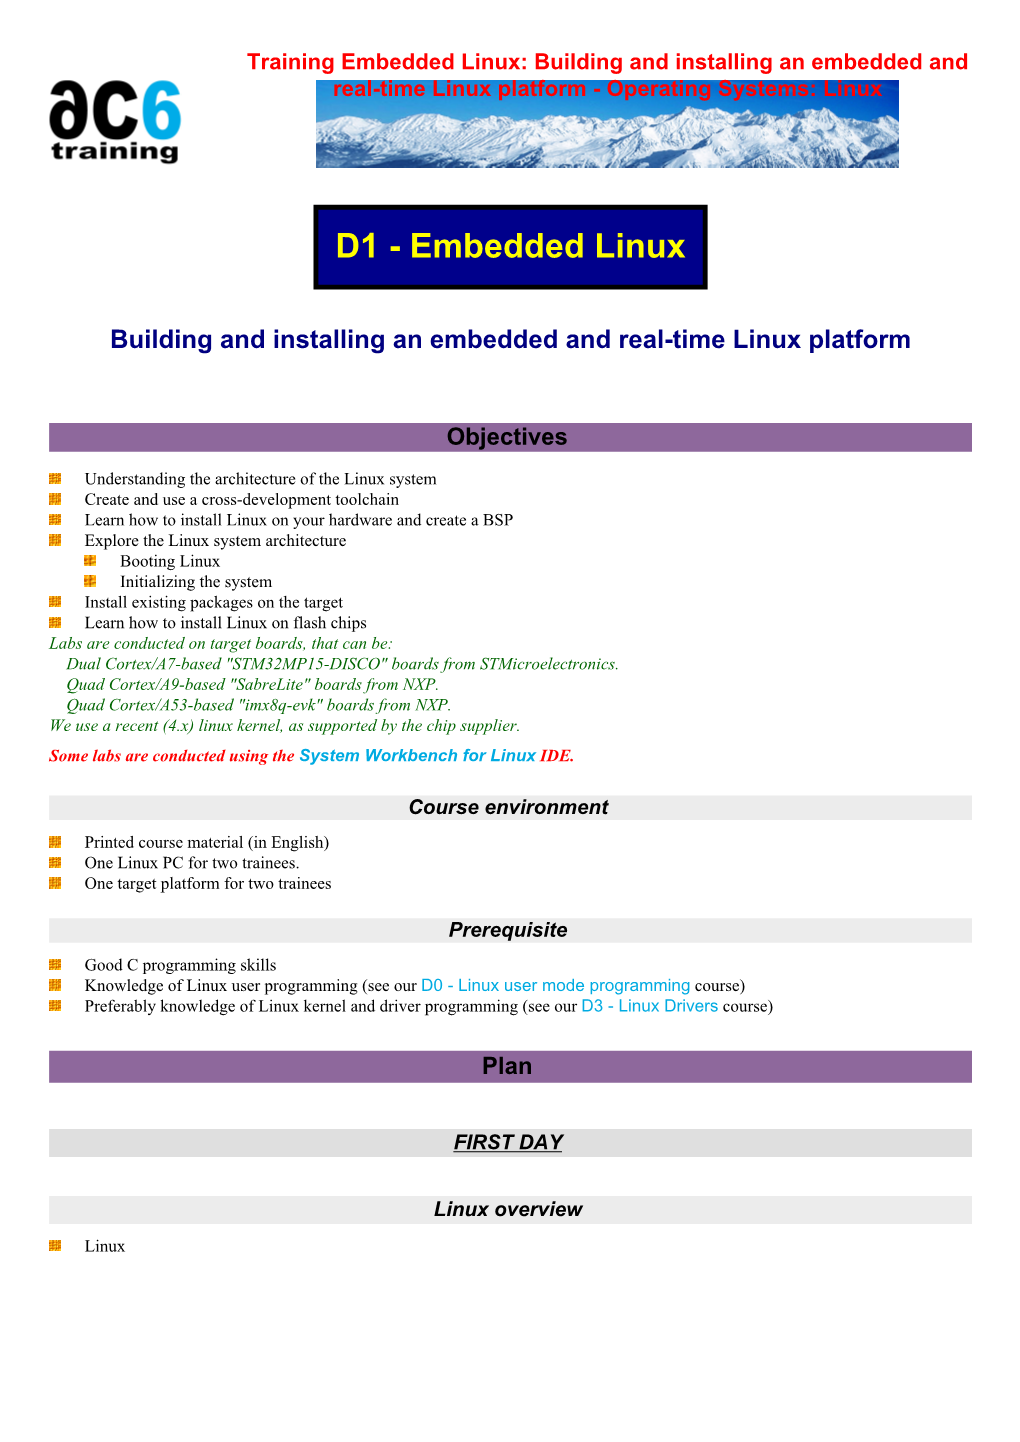 Training Embedded Linux: Building and Installing an Embedded and Real-Time Linux Platform - Operating Systems: Linux